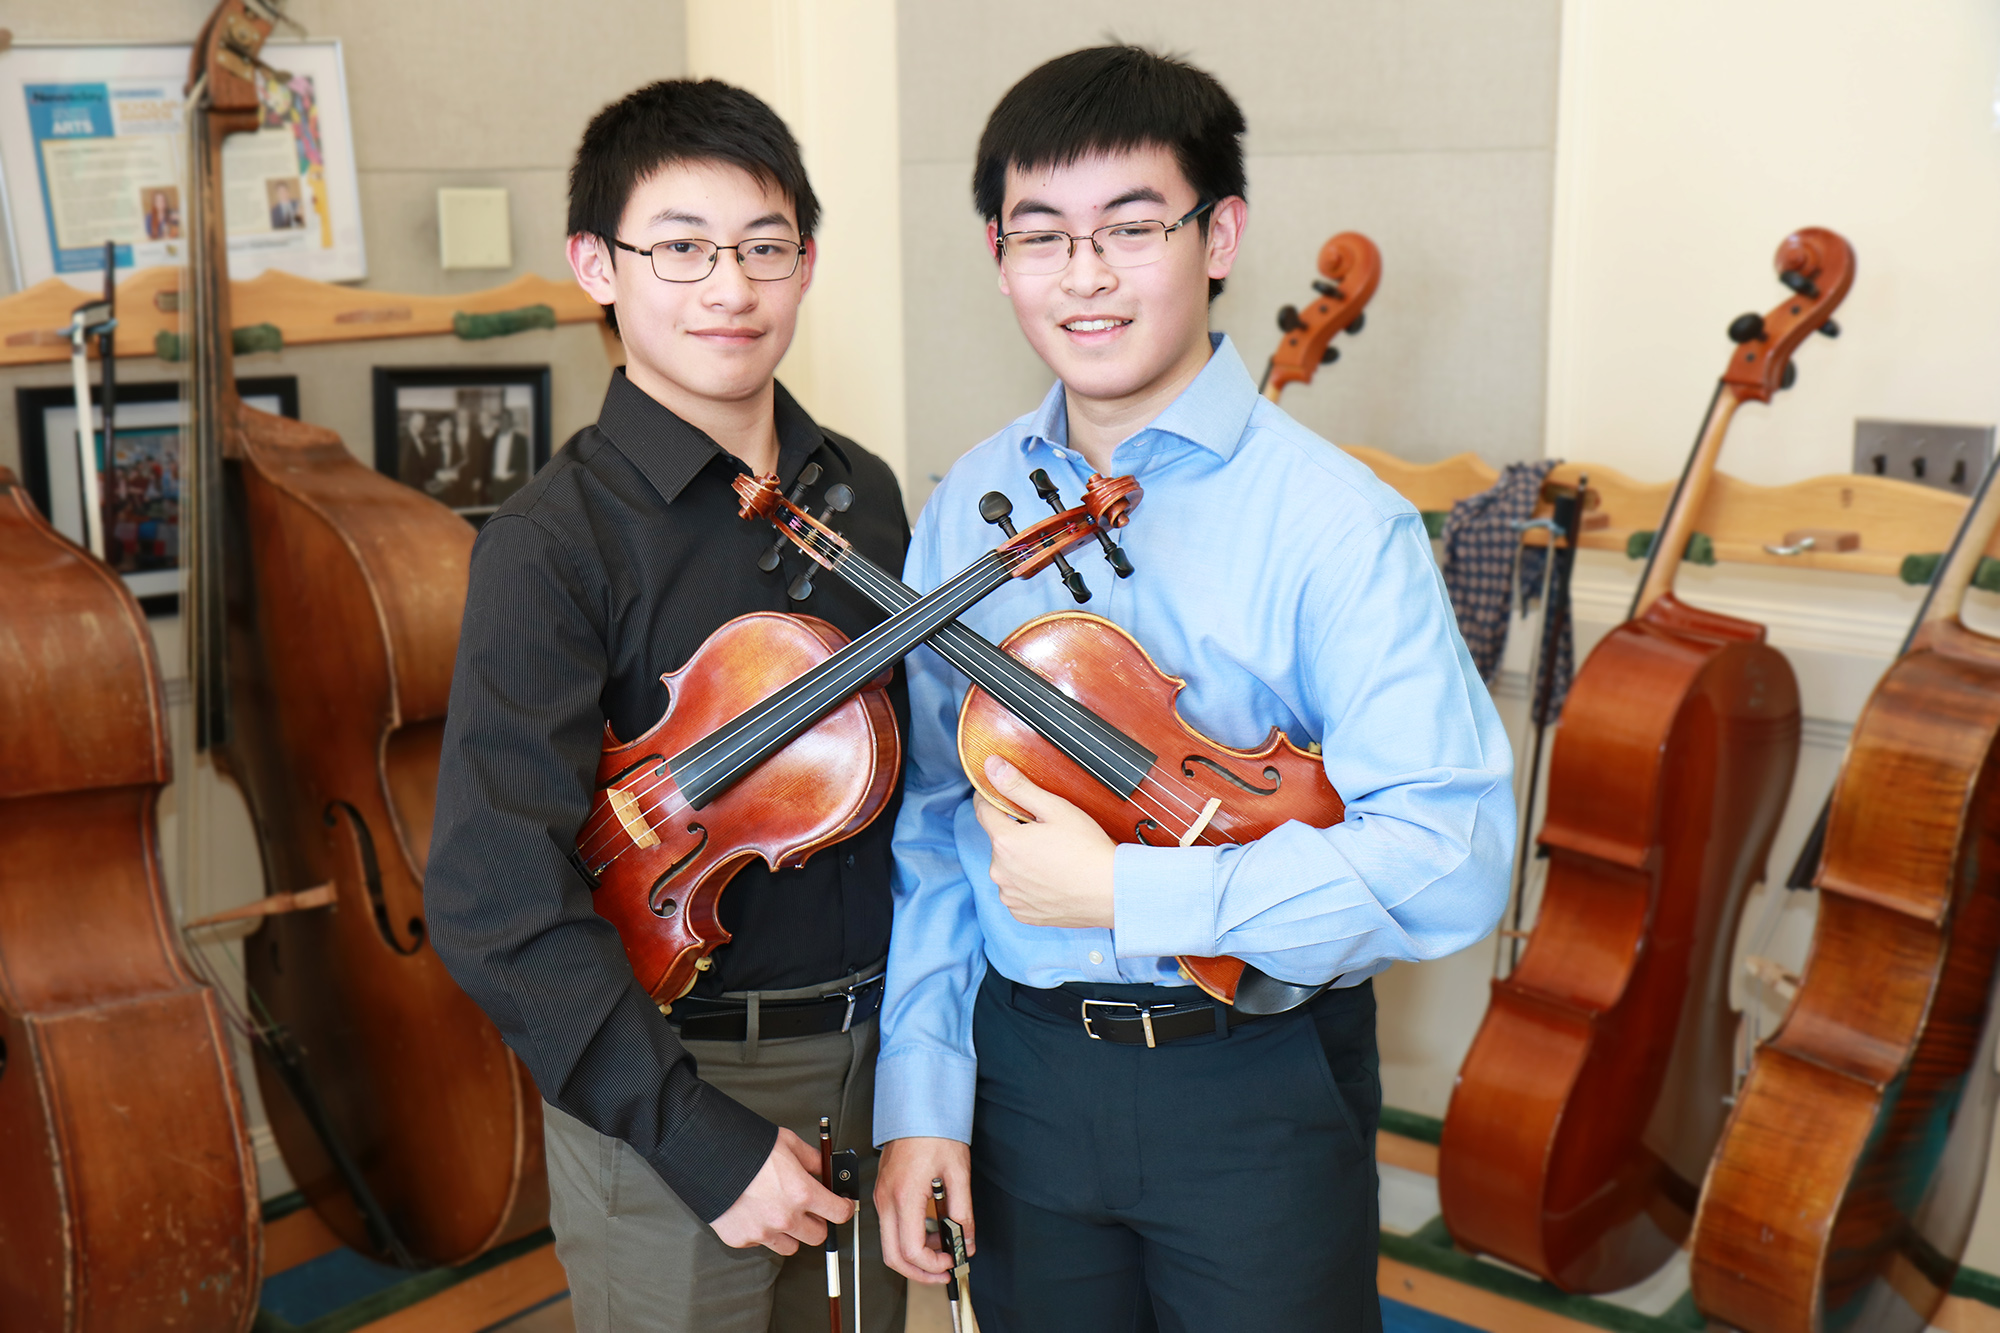 Mark Xu and Matthew Xu, both juniors at North High School, were selected to perform with the 2019 Honor Orchestra of America. (Photo courtesy of the Great Neck Public Schools)